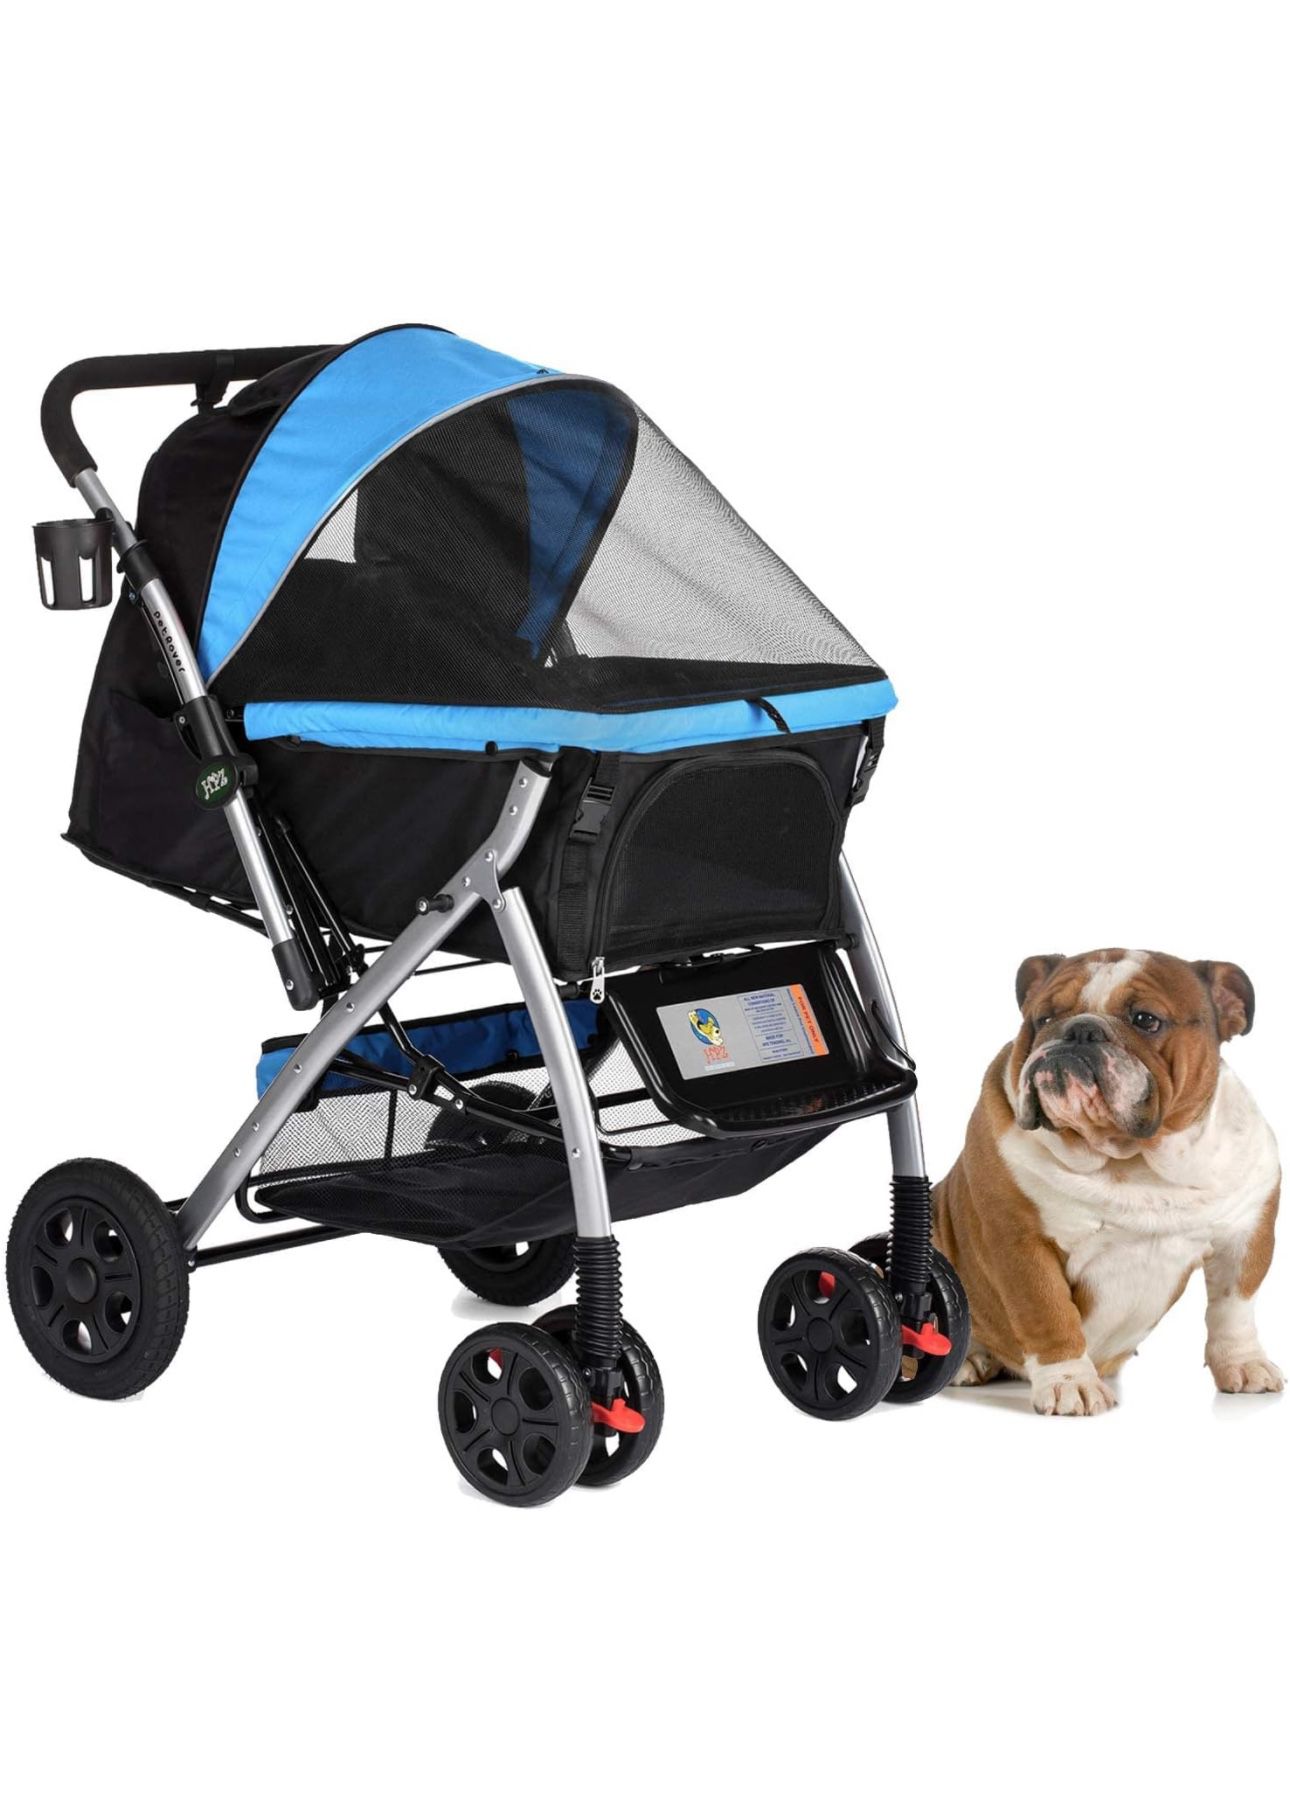 Pet Stroller In Box, New Never Used 